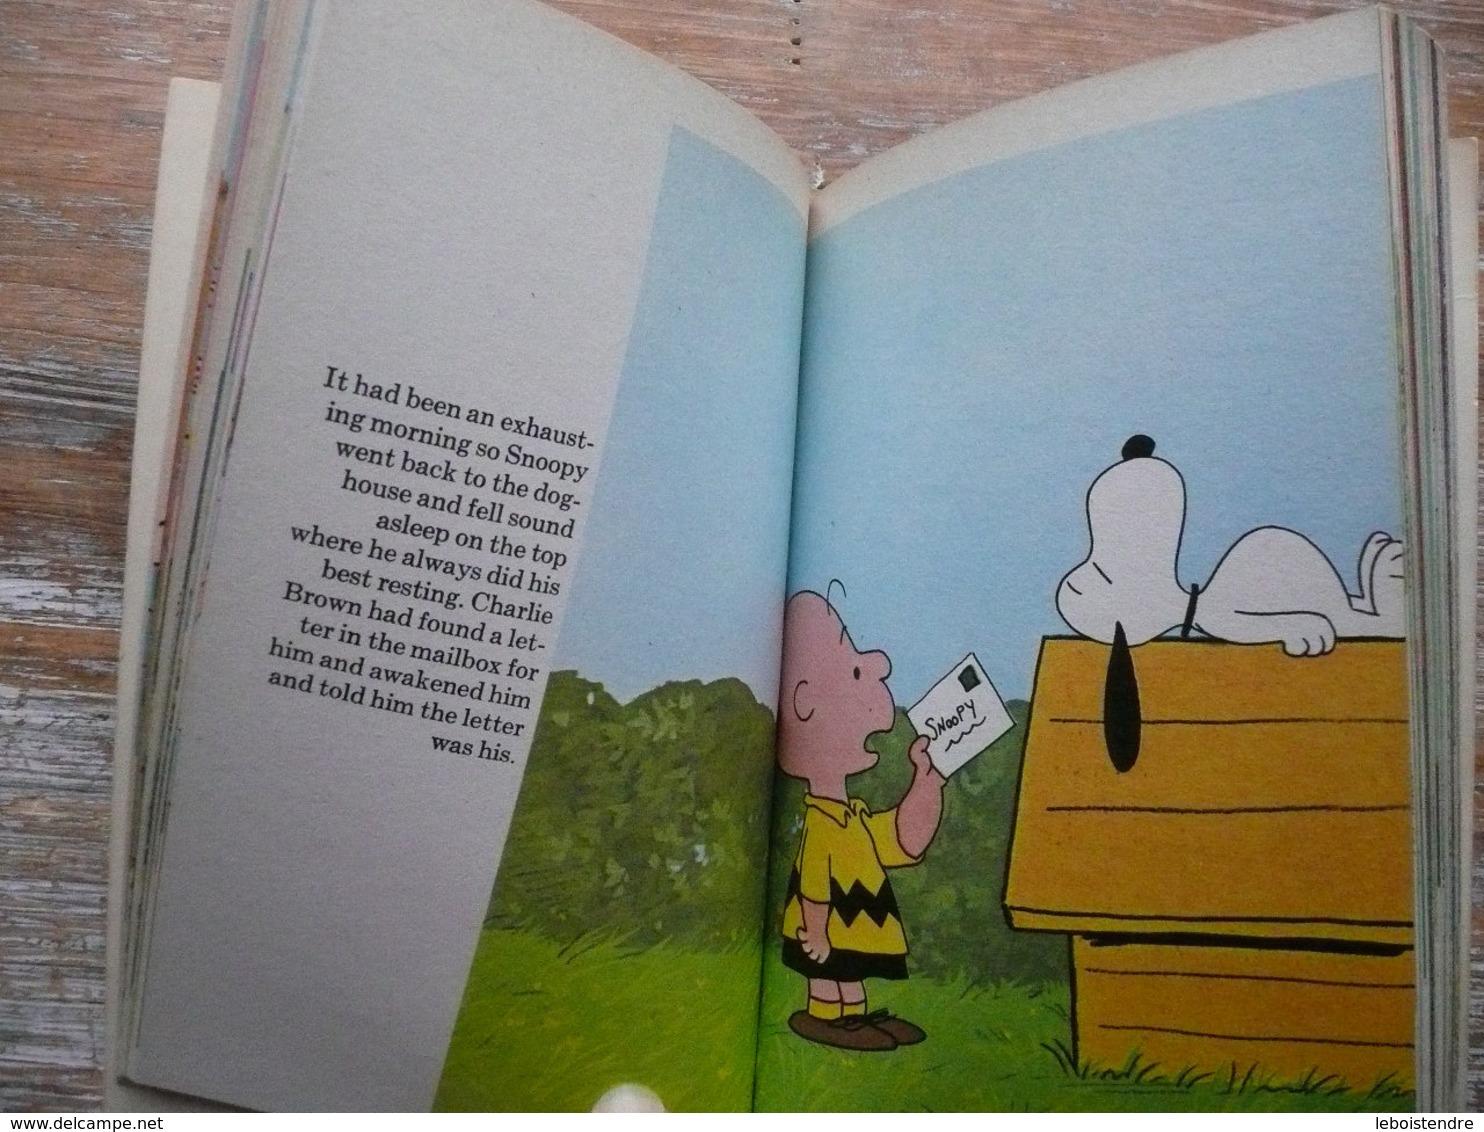 THE " SNOOPY COME HOME " MOVIE BOOK CHARLES M. SCHULZ A FAWCETT CREST BOOK 1972 - Pop-Up Books